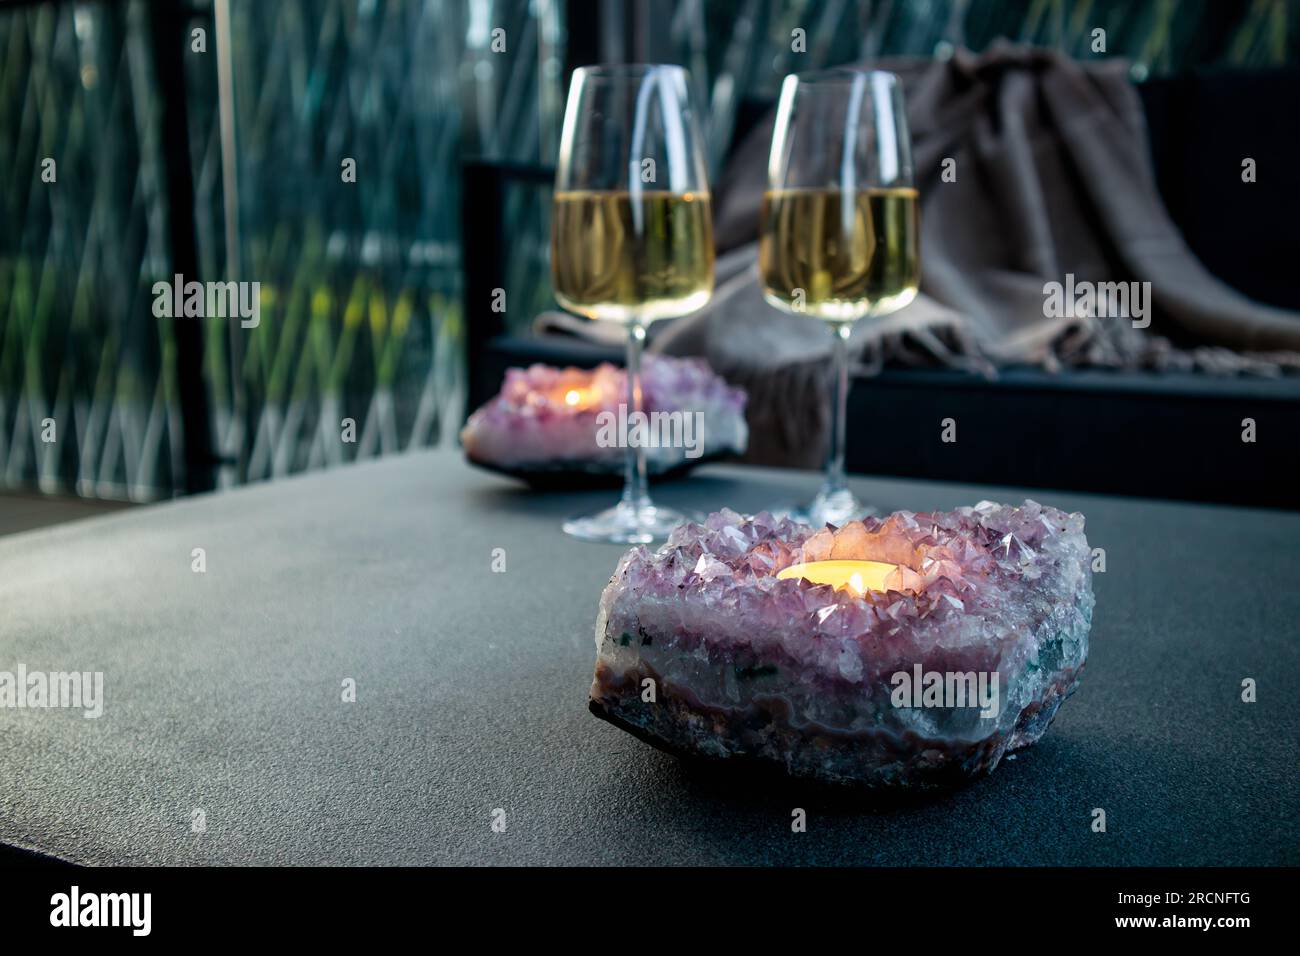 Selective focus on amethyst crystal geode candle holder with tea light candle burning inside, two white wine glasses on background in the evening. Stock Photo